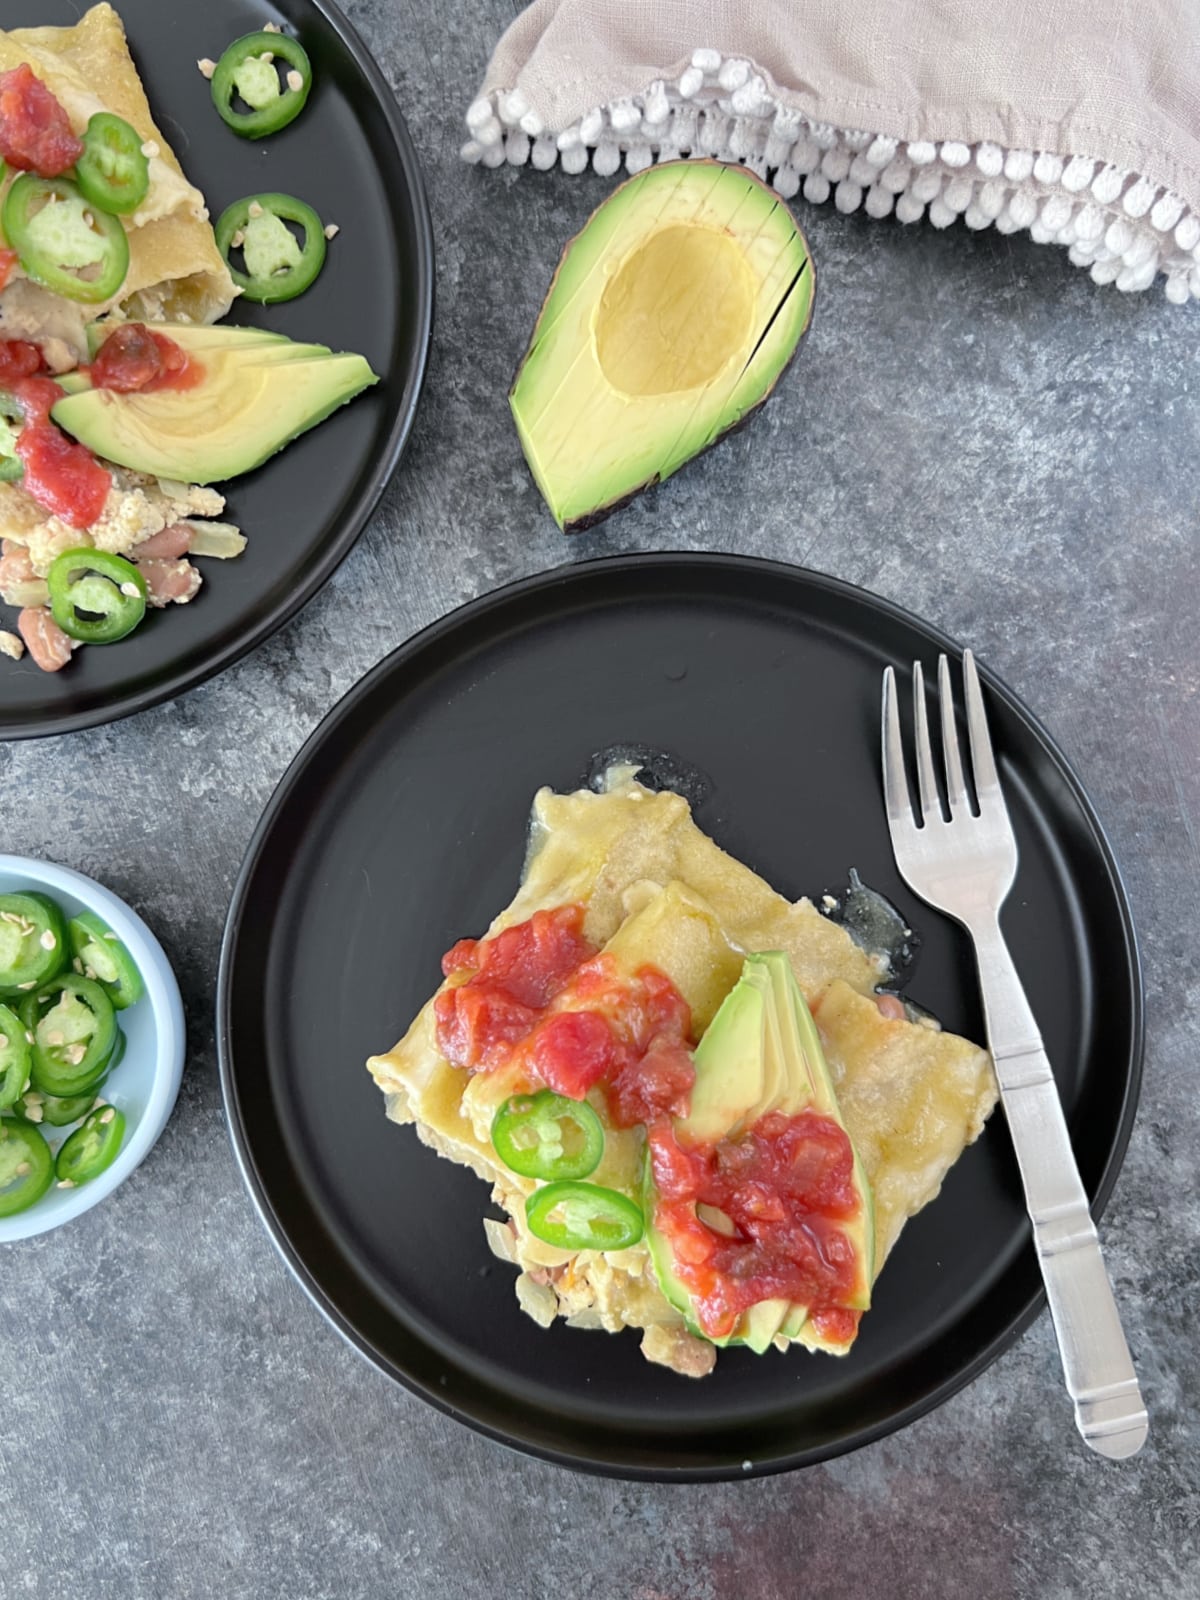 Overhead view of two plates of breakfast enchiladas sit on a dark grey marble surface. Enchiladas are filled with a tofu scramble and beans, and garnished with sliced jalapeños, sliced avocado, and deep red salsa. A half avocado, a small bowl of jalapeno slices, and a tan cloth napkin sit on the side.